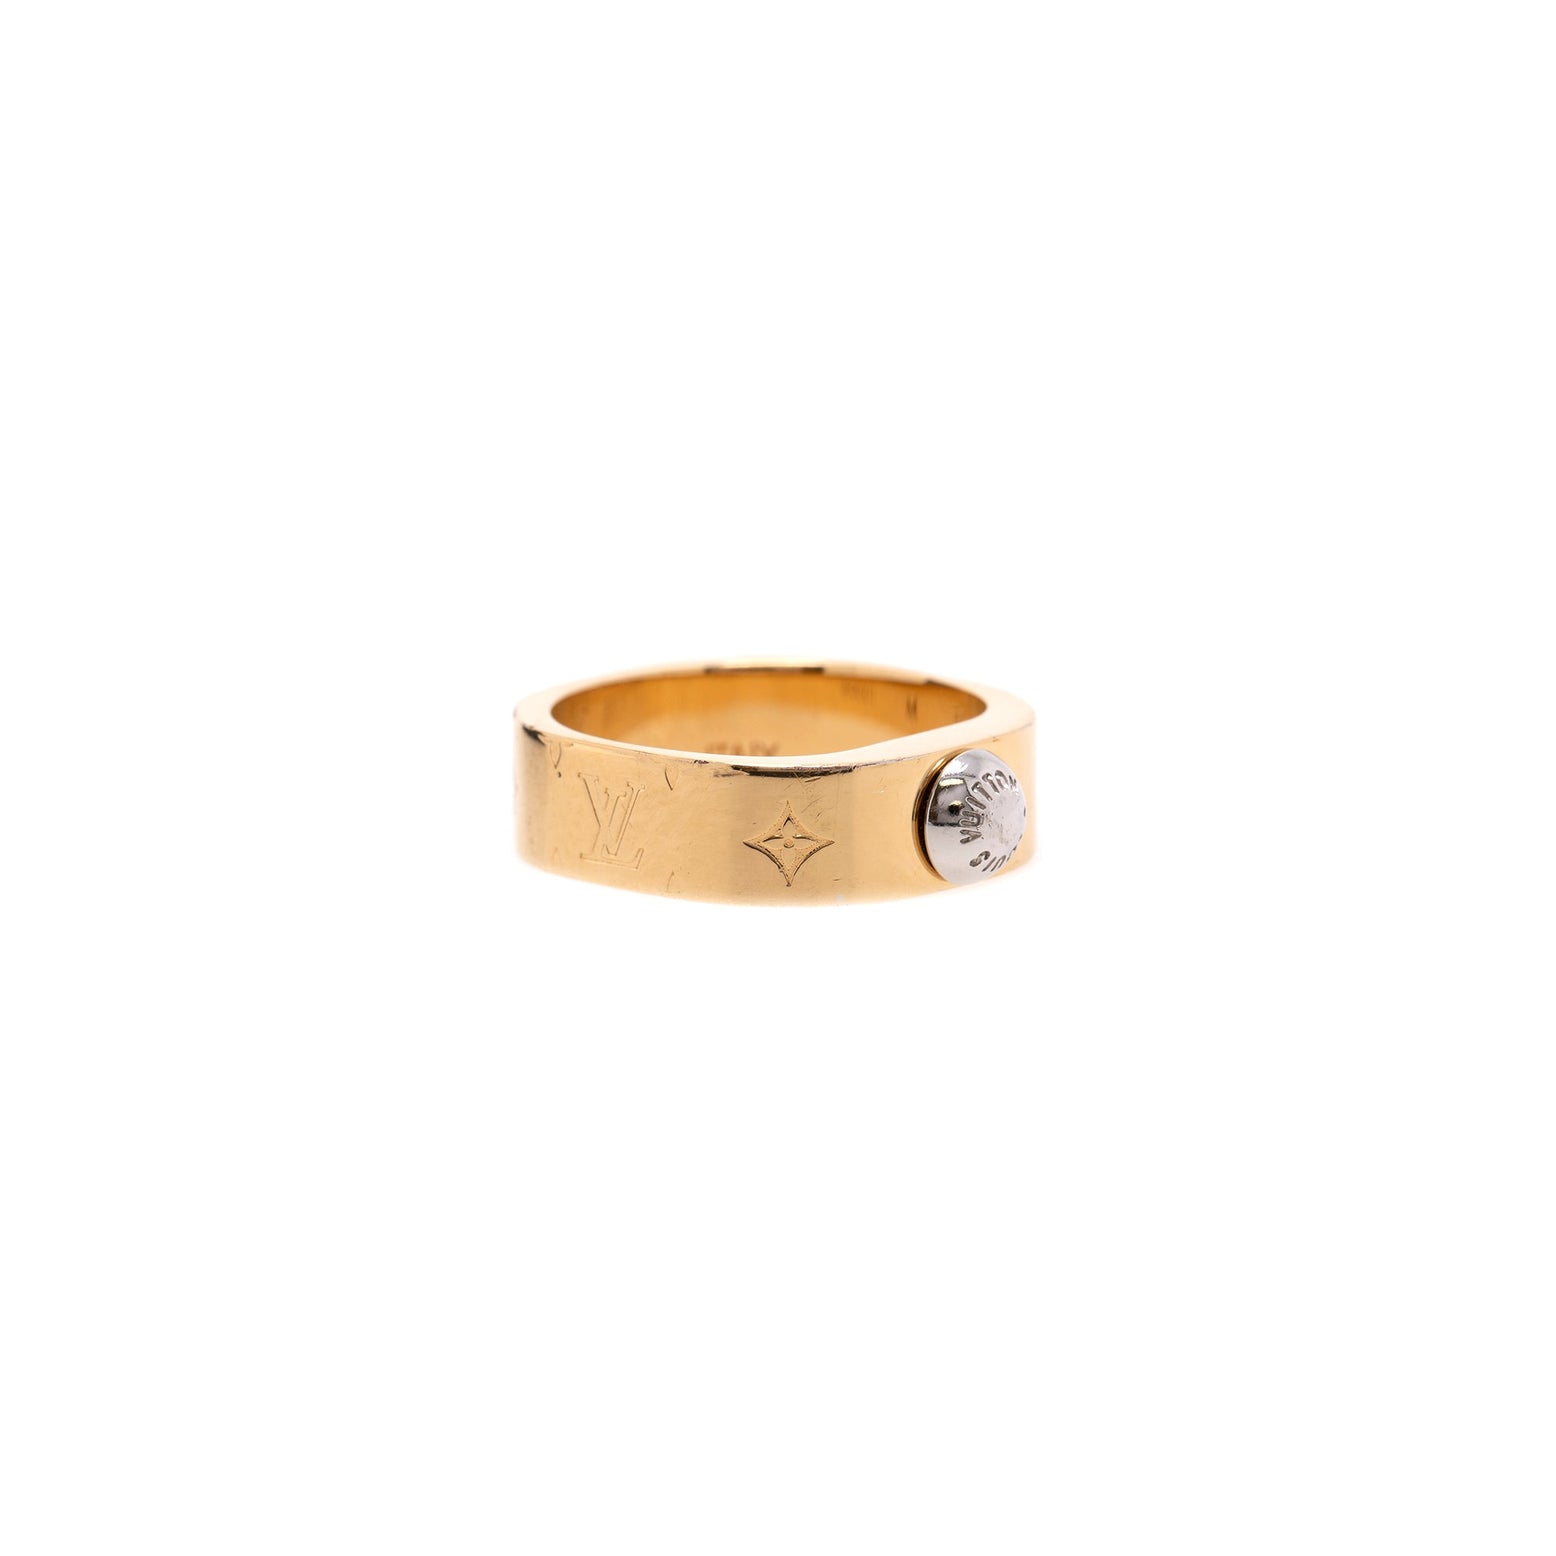 AUTHENTIC LOUIS VUITTON Nanogram Ring - Size M - M00216 $400 Out Of Stock